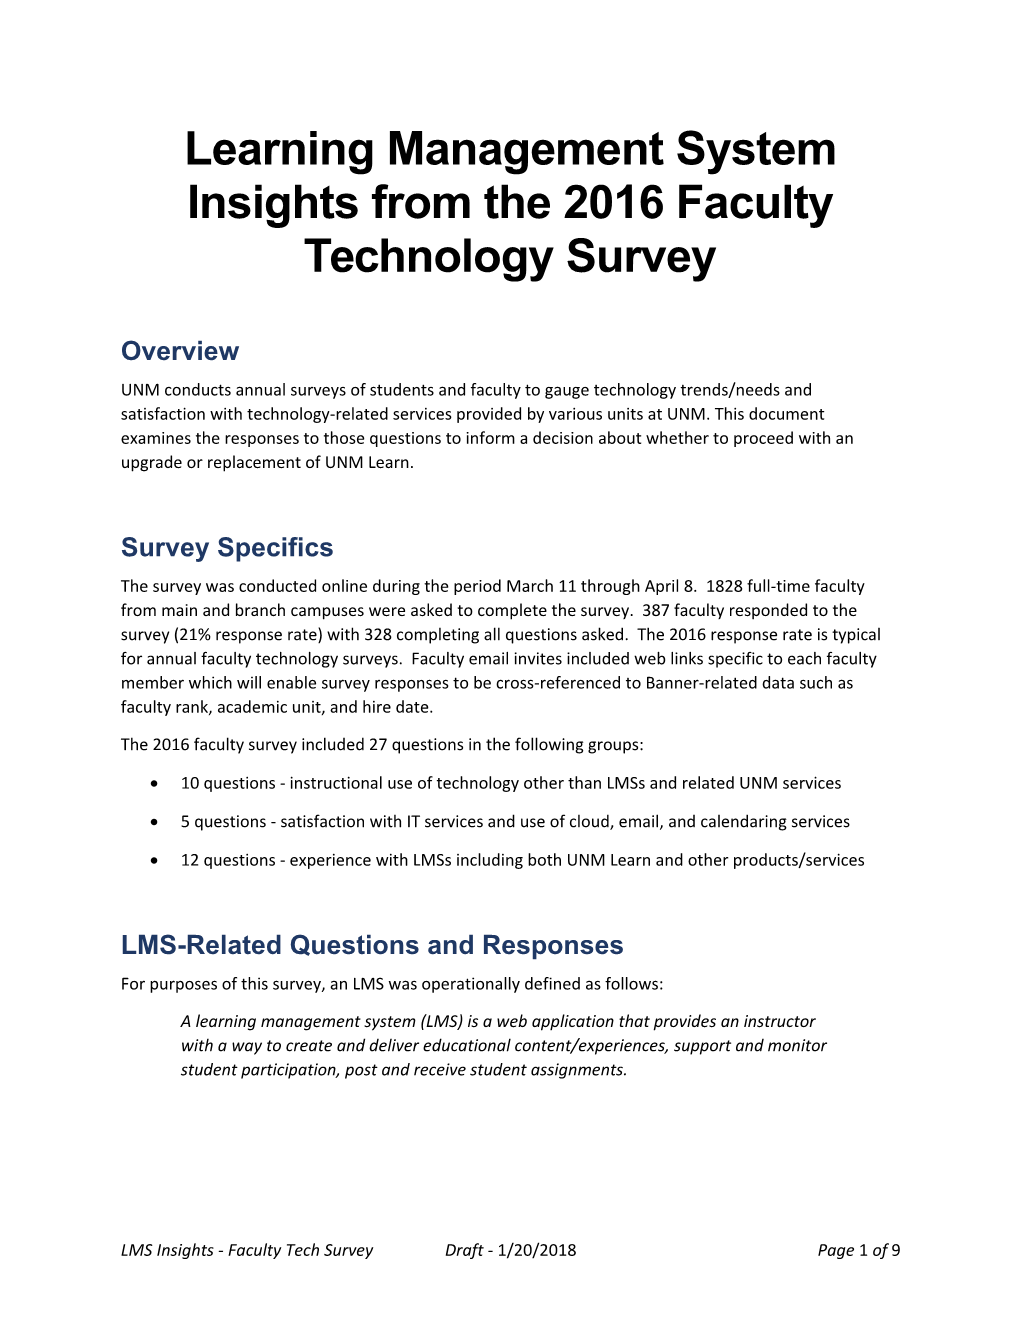 Learning Management System Insights from the 2016 Faculty Technology Survey